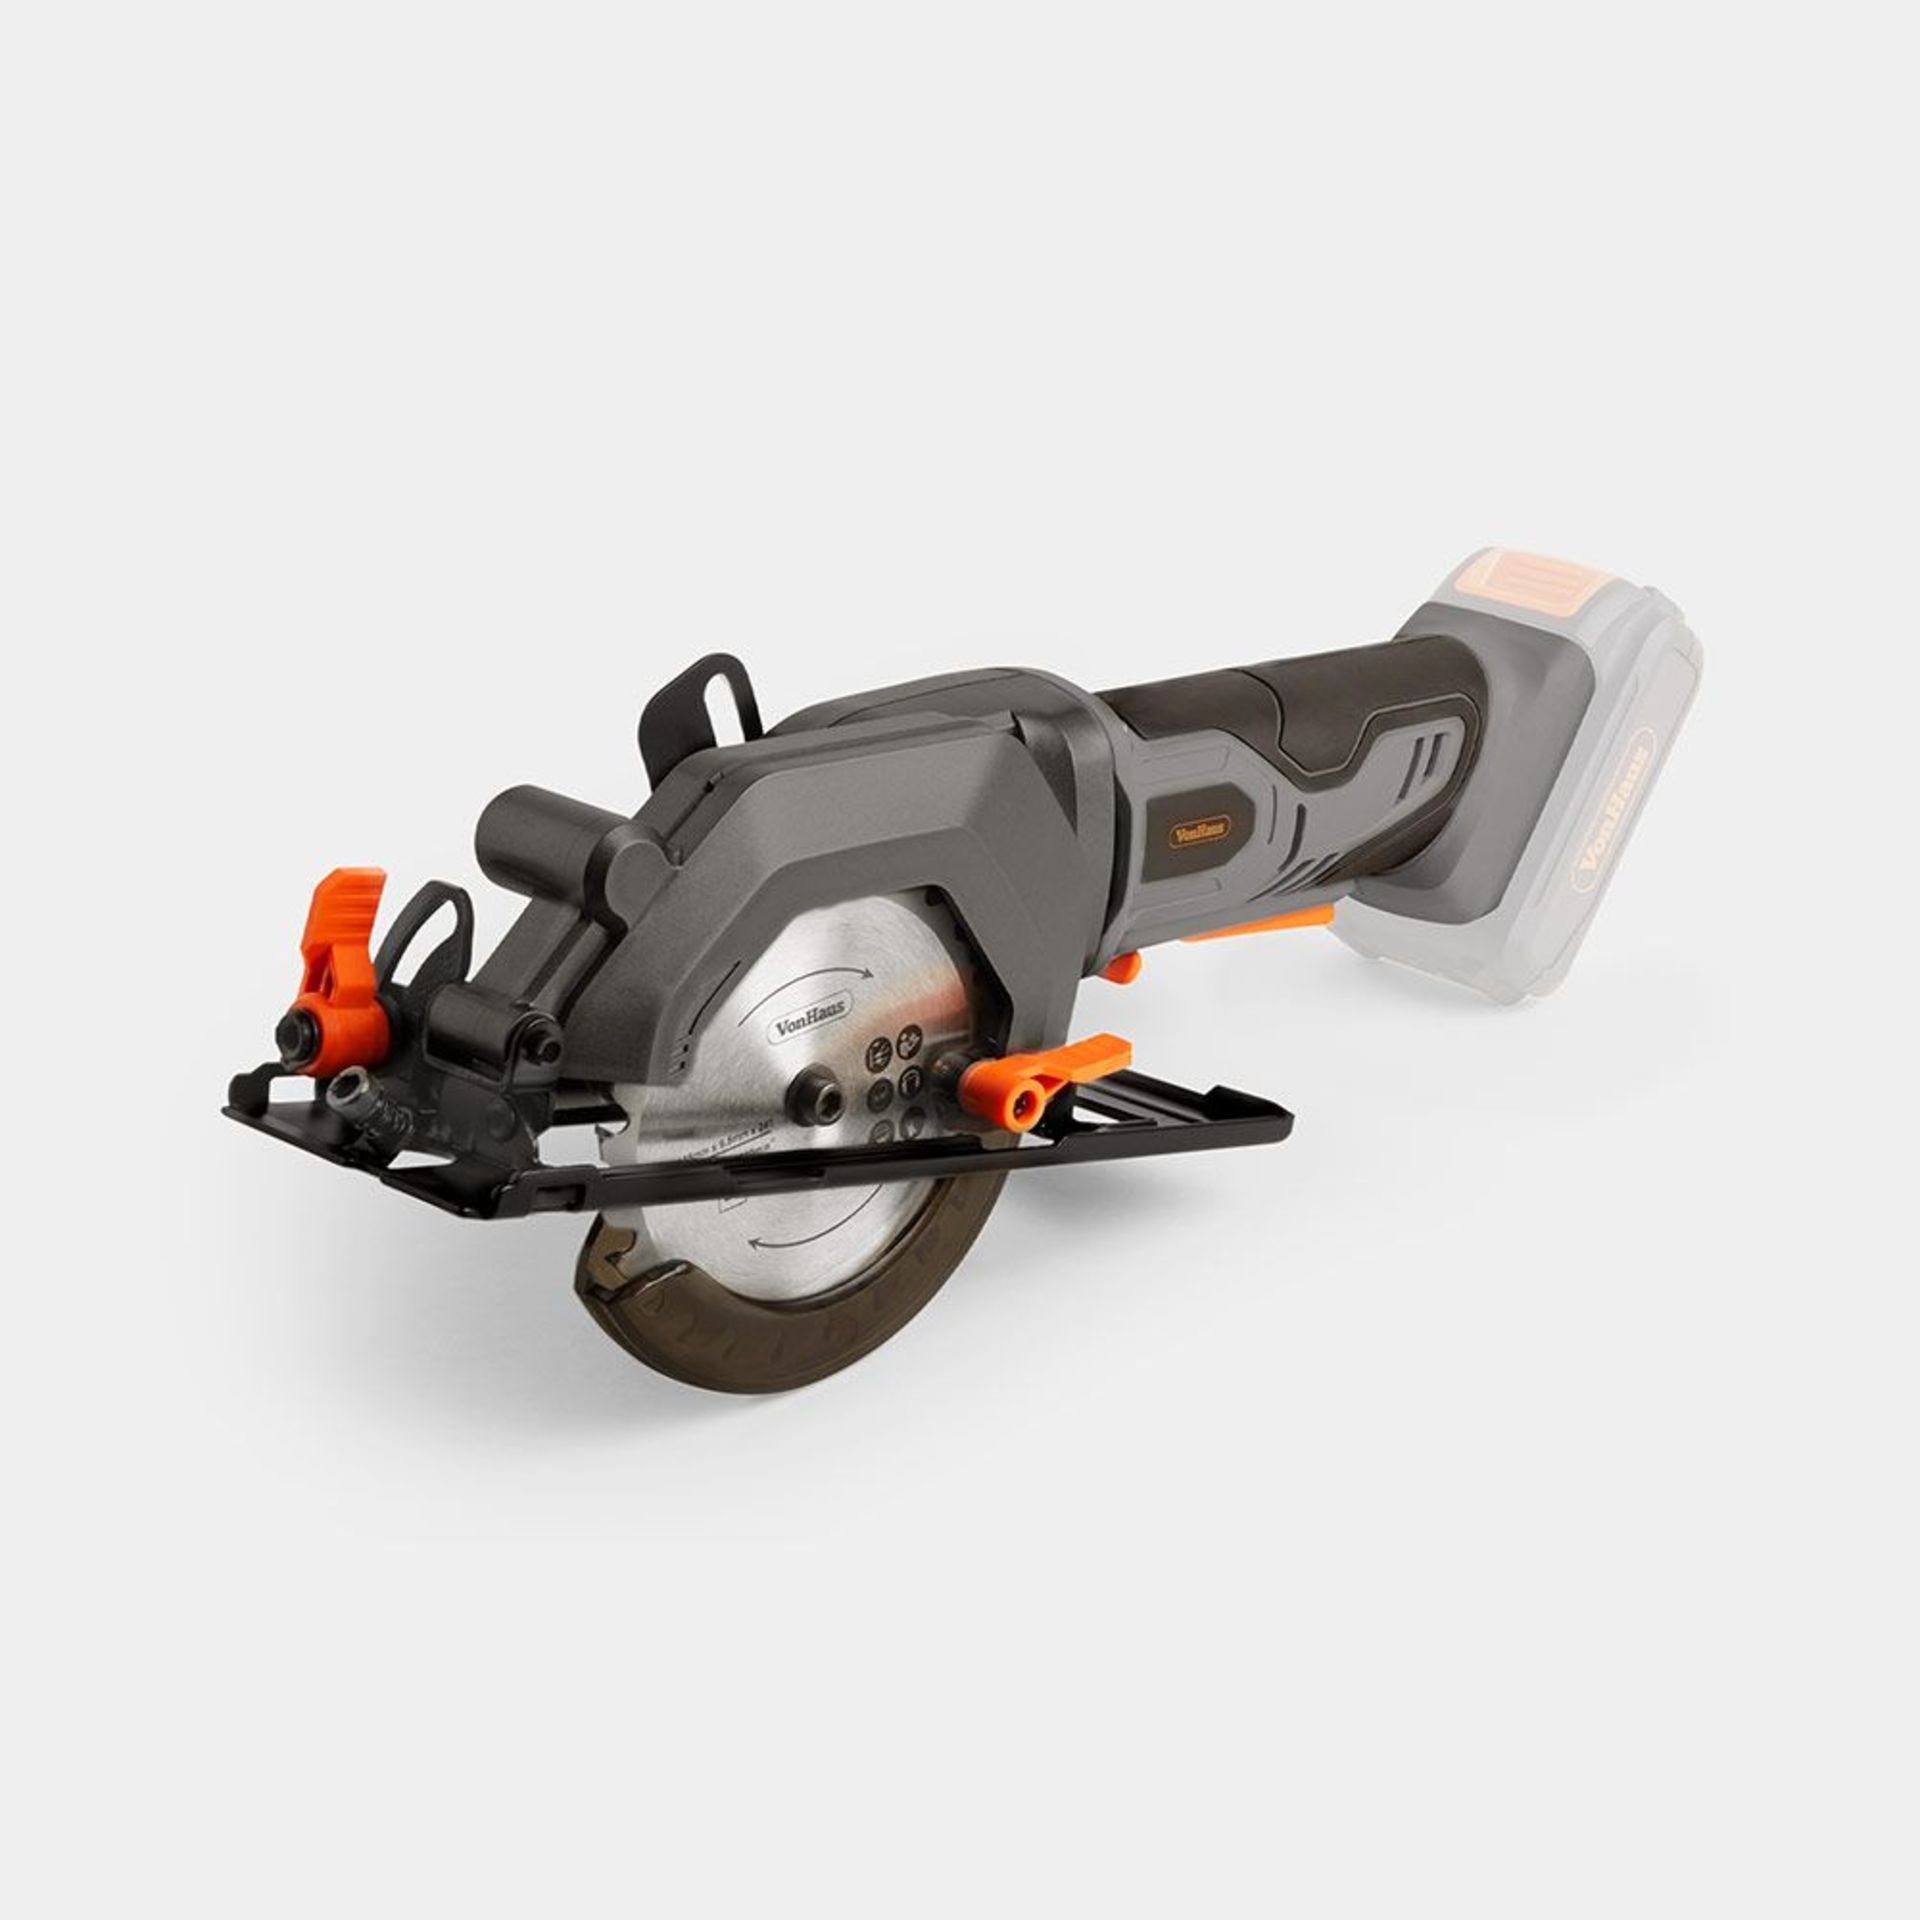 E-Series Cordless Circular Saw. - R8. Powerful and robust, sporting a 115mm blade with an impressive